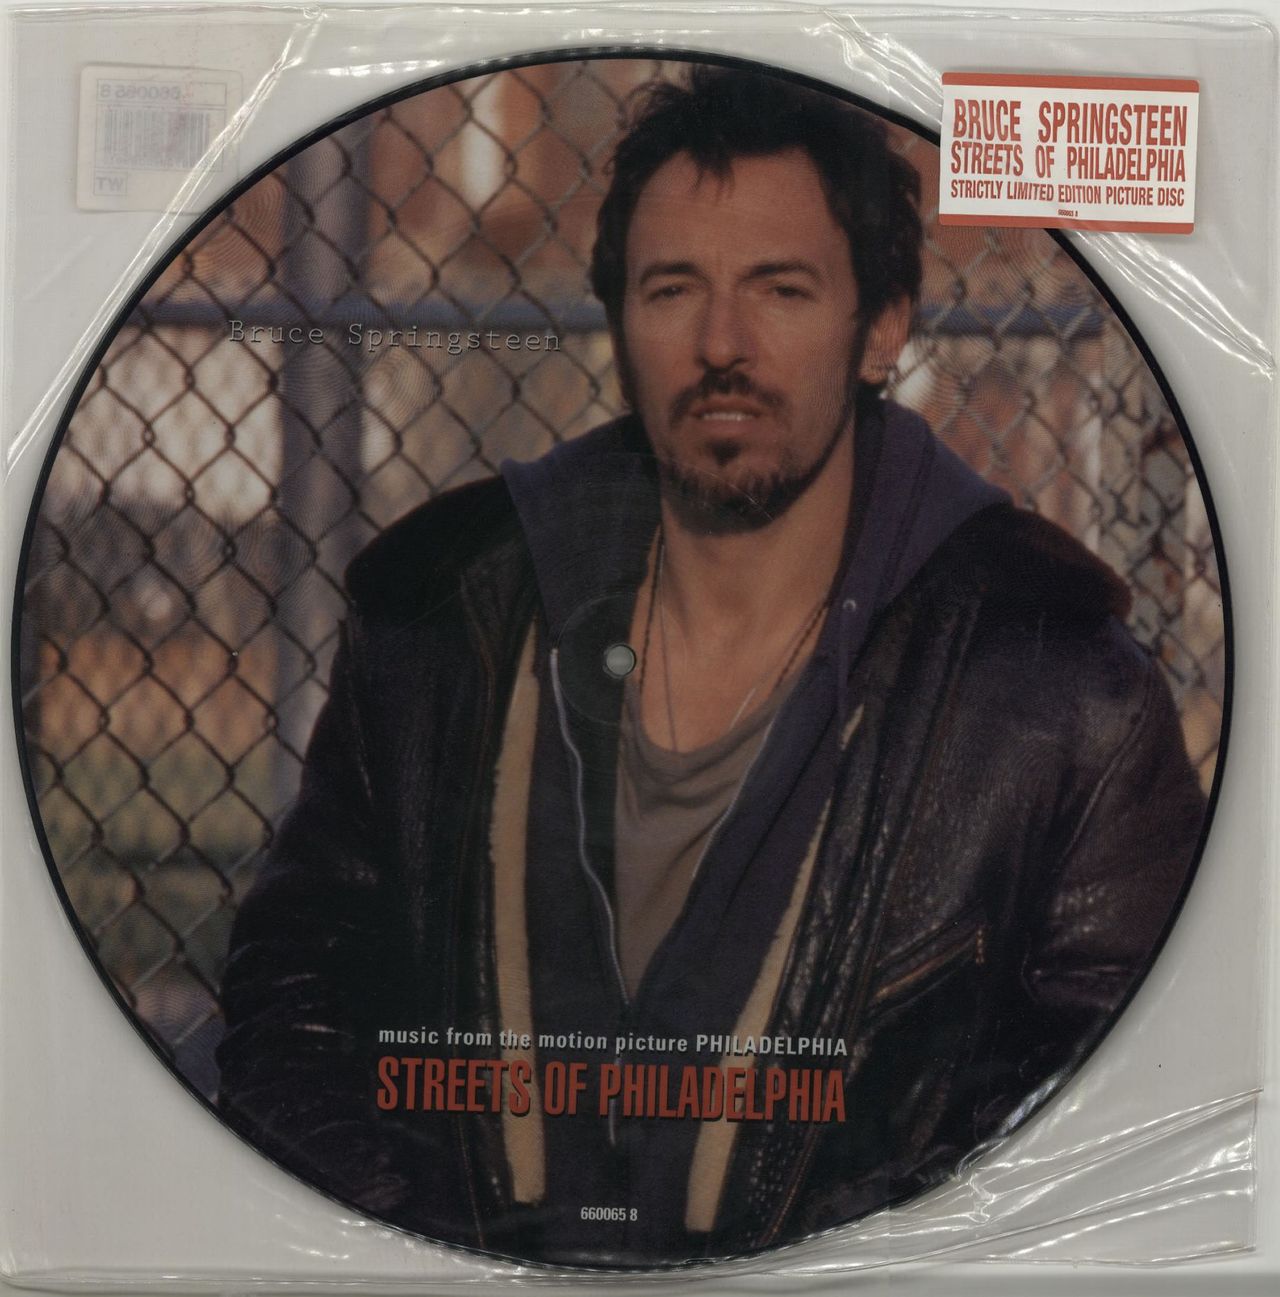 Bruce Springsteen Streets Of Philadelphia - Hype Stickered UK 12" vinyl picture disc (12 inch picture record) 6600658